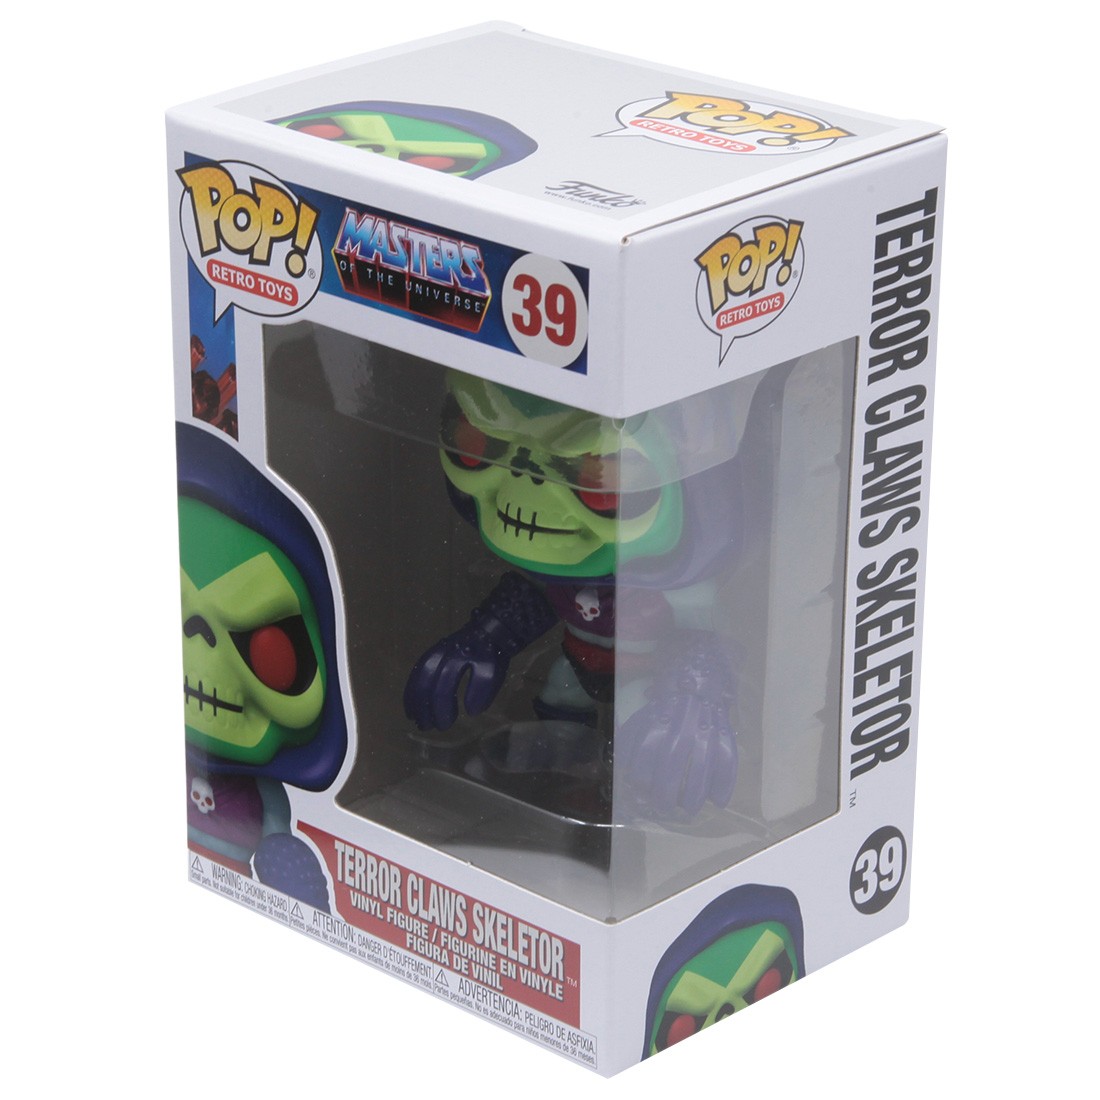 Funko Pop!: Masters of The Universe - Skeltor with Terror Claws